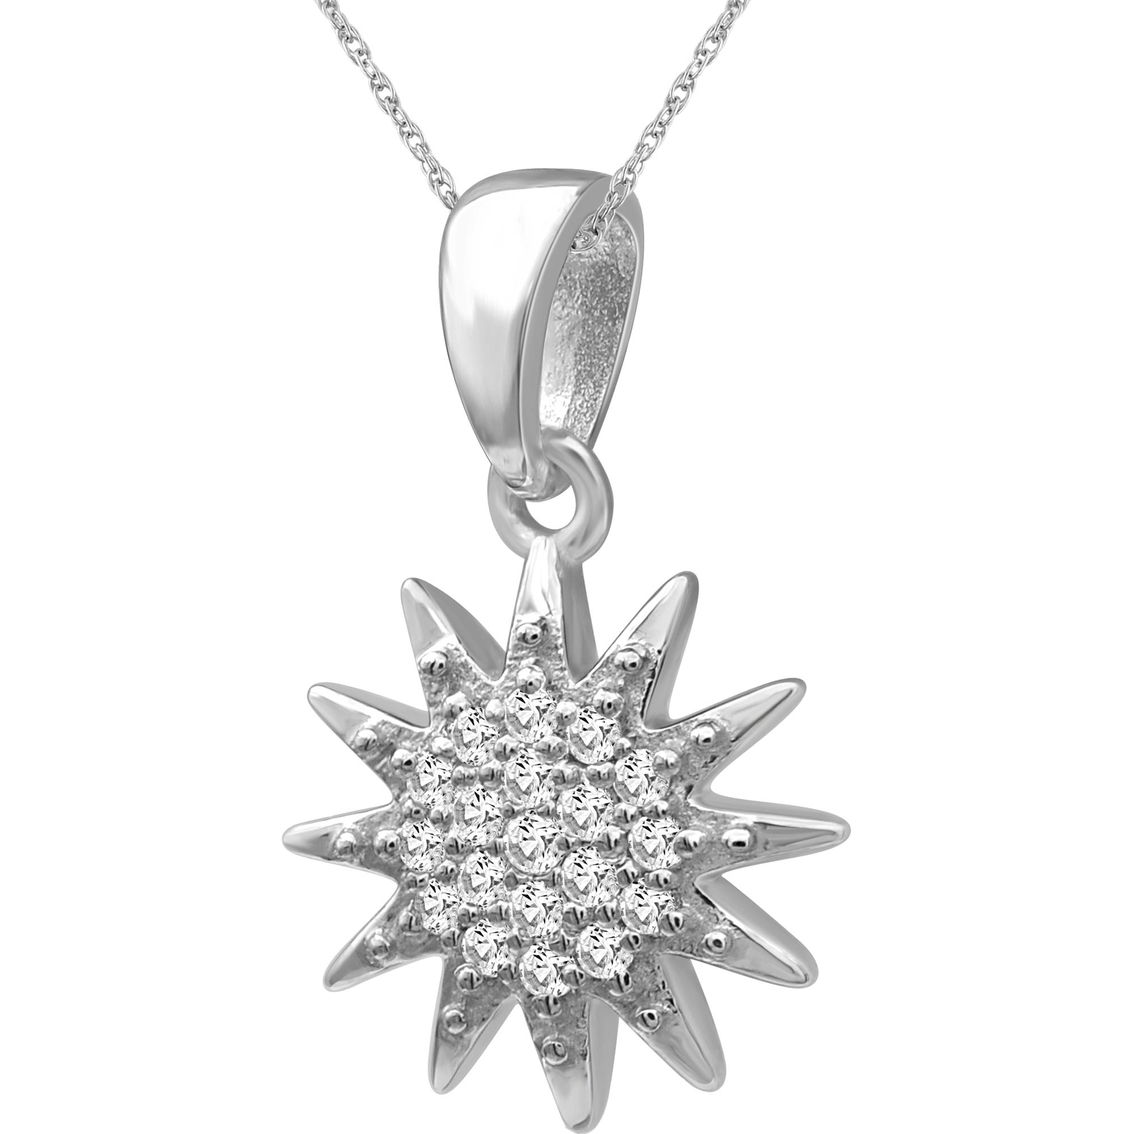 She Shines Sterling Silver 1/4 CTW Diamond Earring and Star Pendant Set - Image 2 of 7